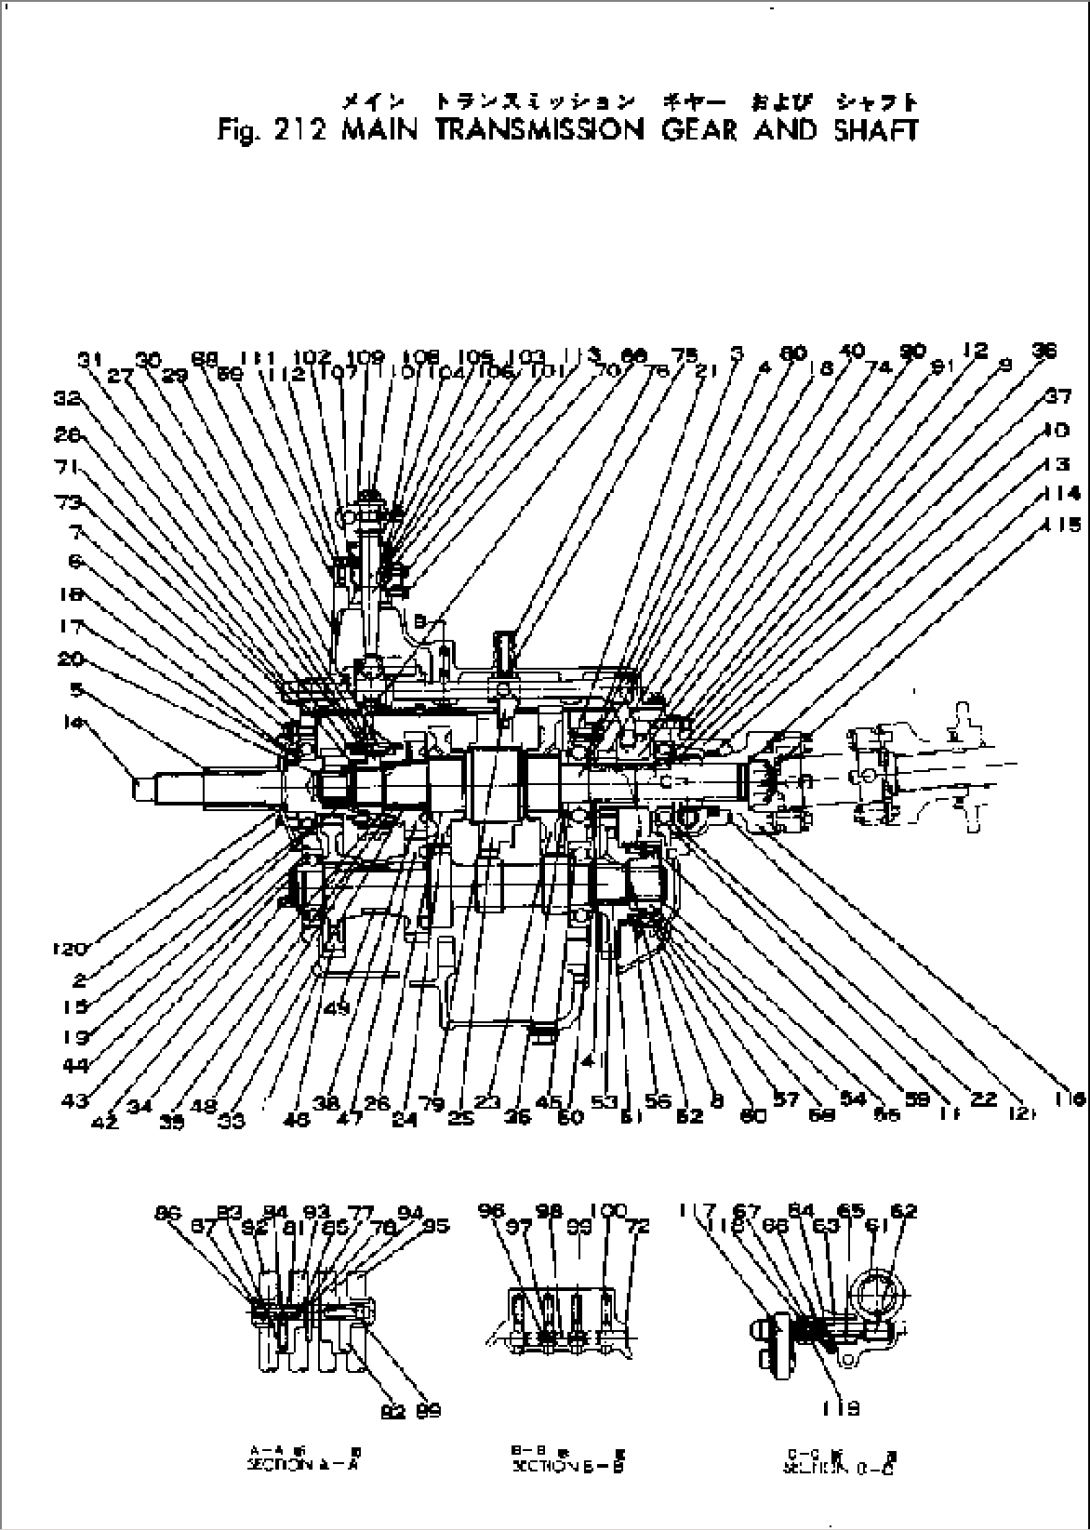 MAIN TRANSMISSION GEAR AND SHAFT